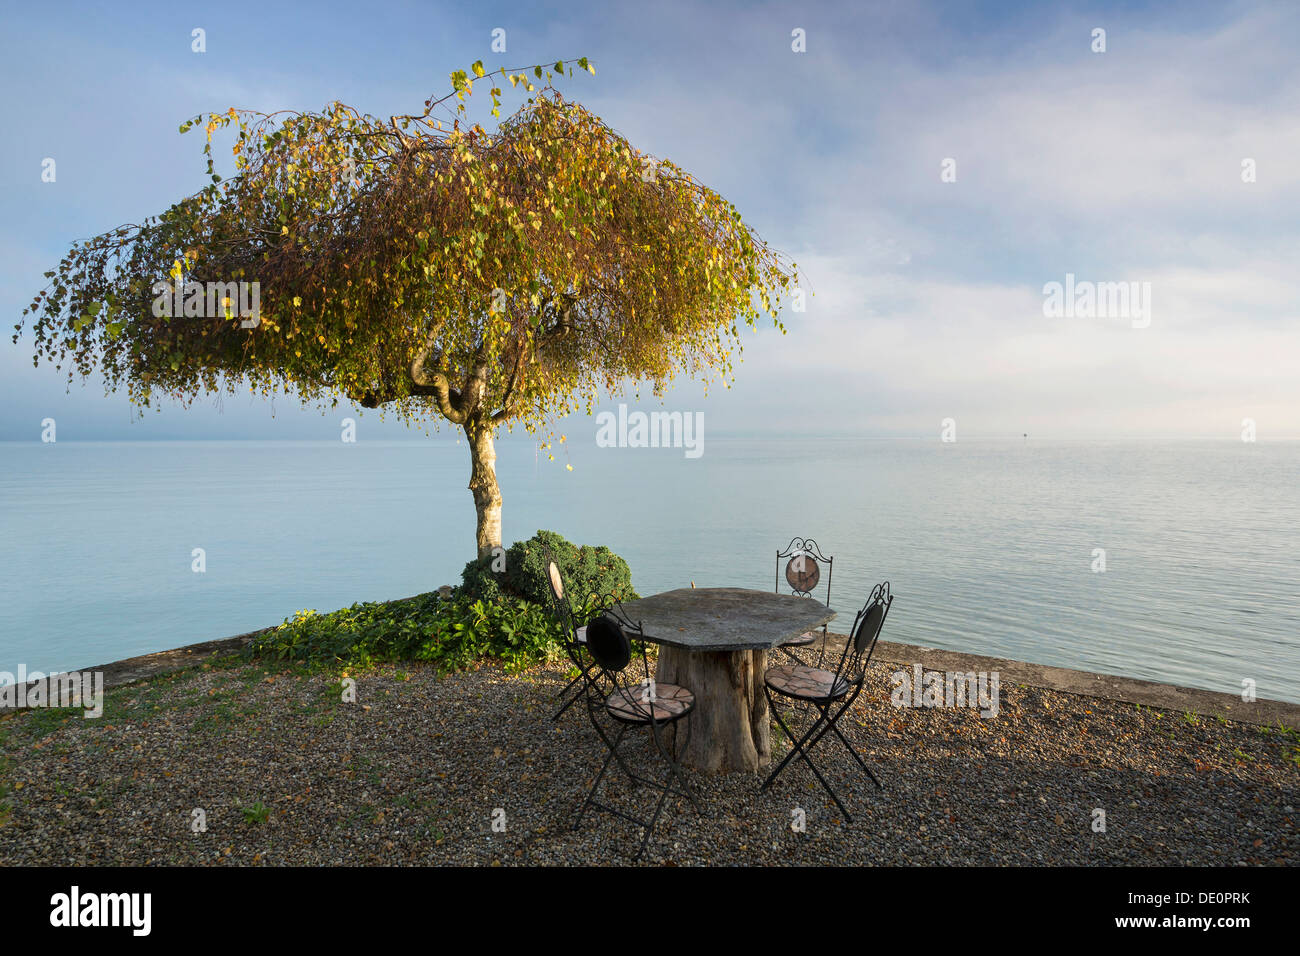 Garden furniture and a tree, early morning mood on Lake Constance near Landschlacht, Switzerland, Europe, PublicGround Stock Photo